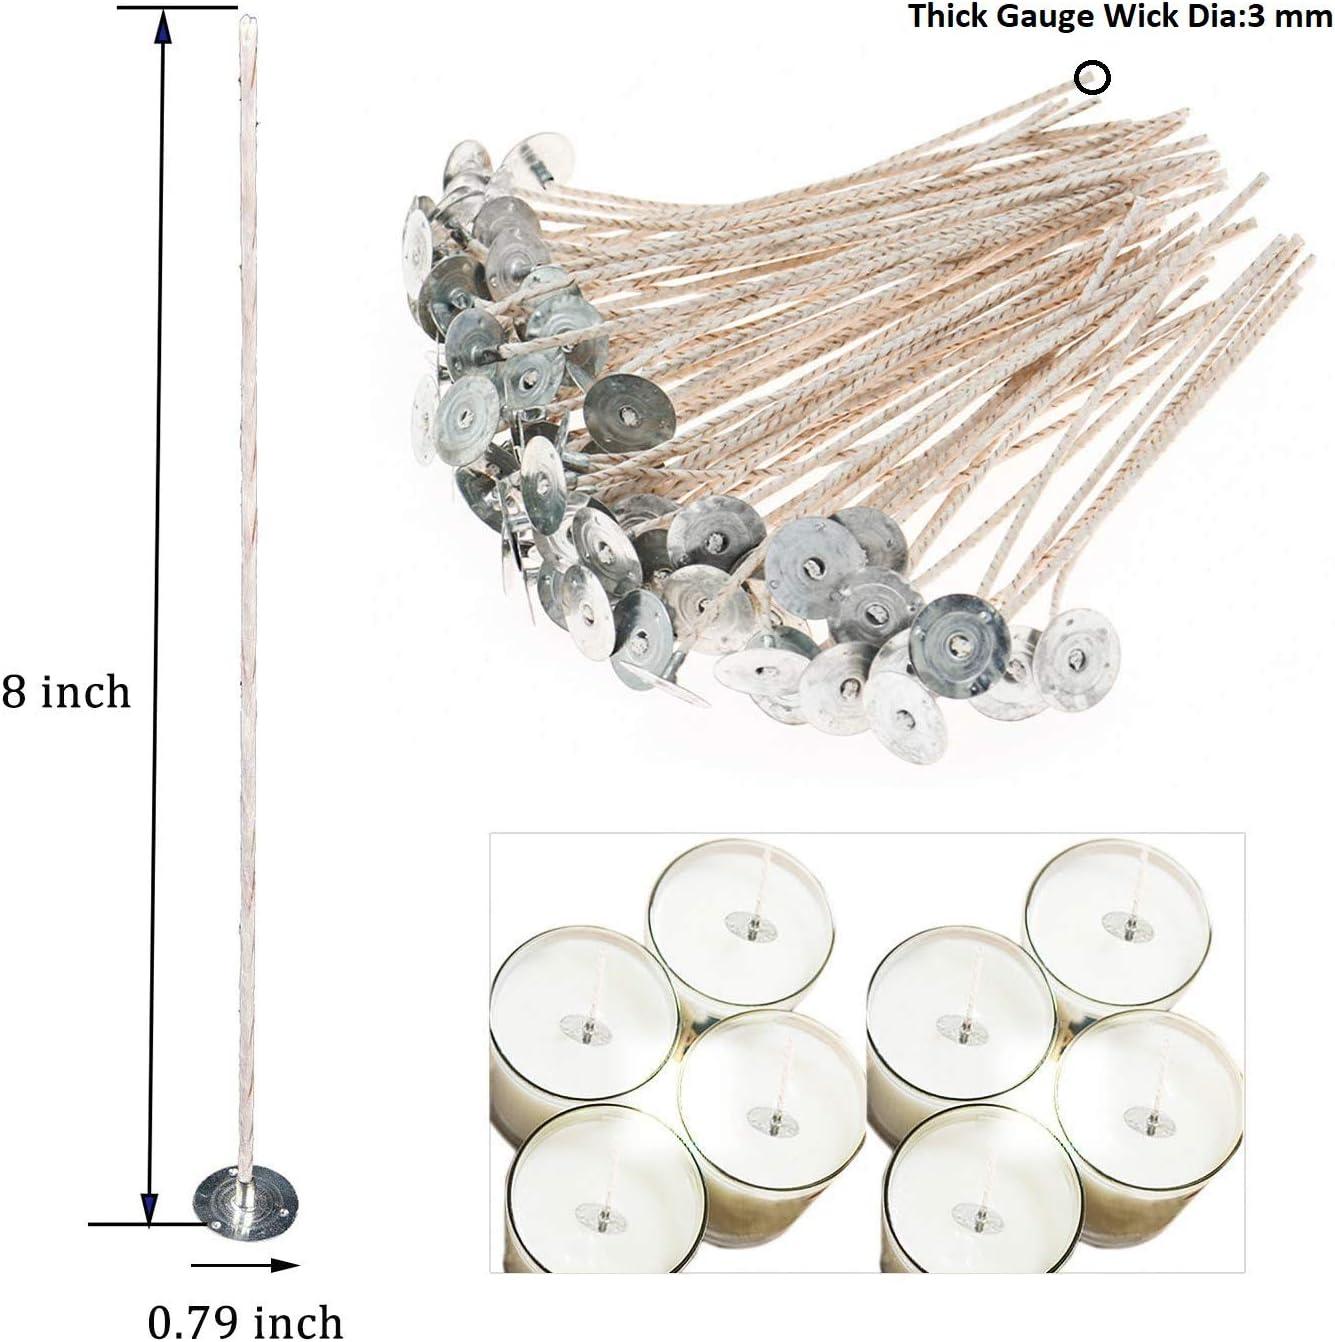 100pcs ECO14 Wicks for Soy Candles, 8 inch Pre-Tabbed Candle Wick for Candle  Making,Thick